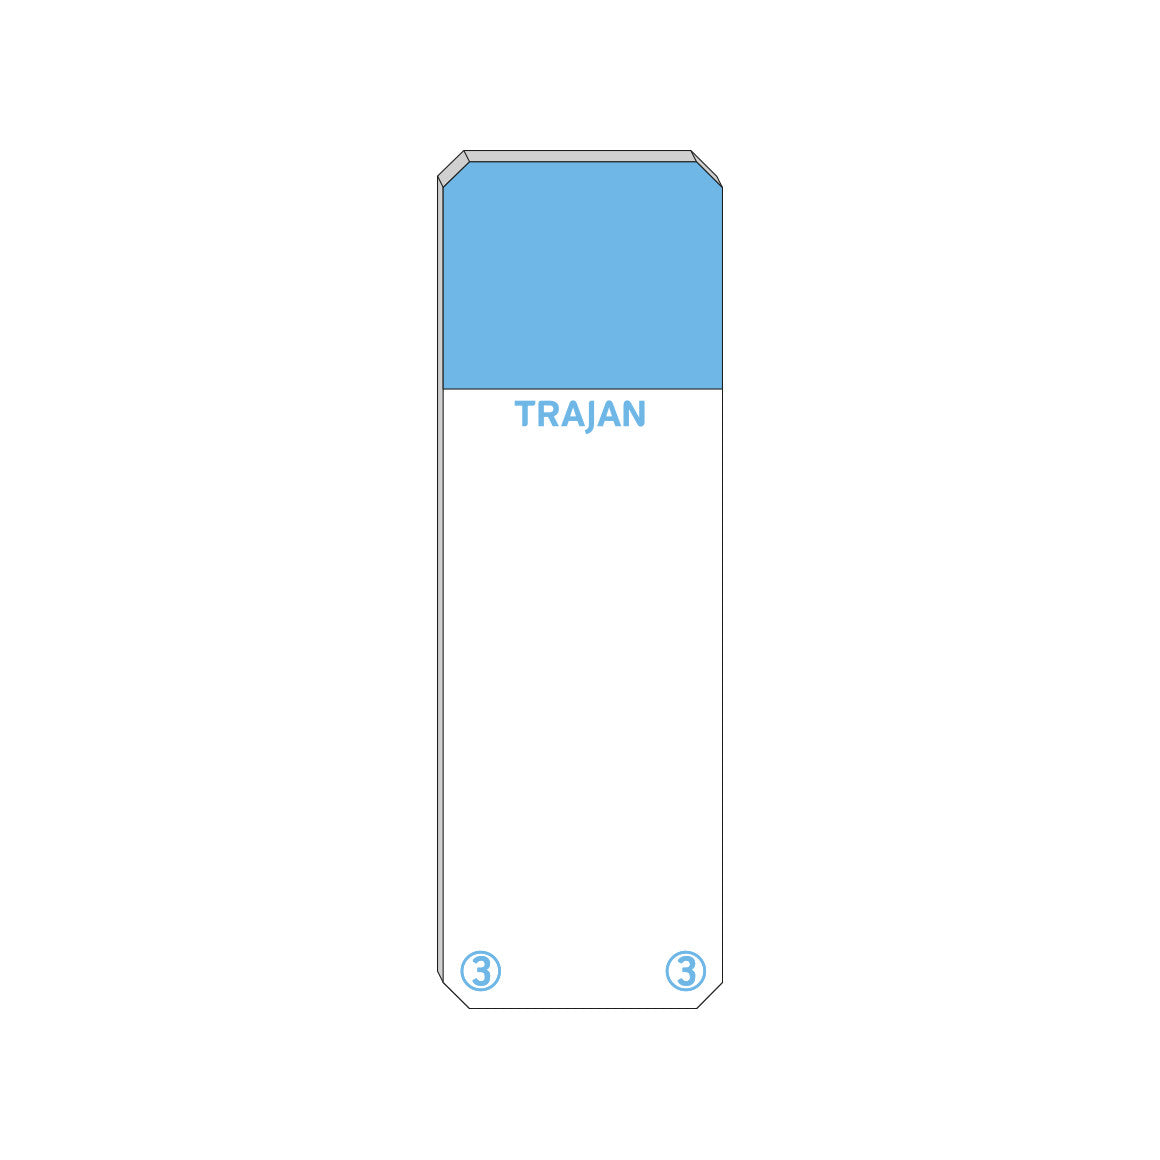 Trajan Scientific and Medical, Series 3 Adhesive Microscope Slides, Blue, Frost 20 mm, 76 mm x 26 mm